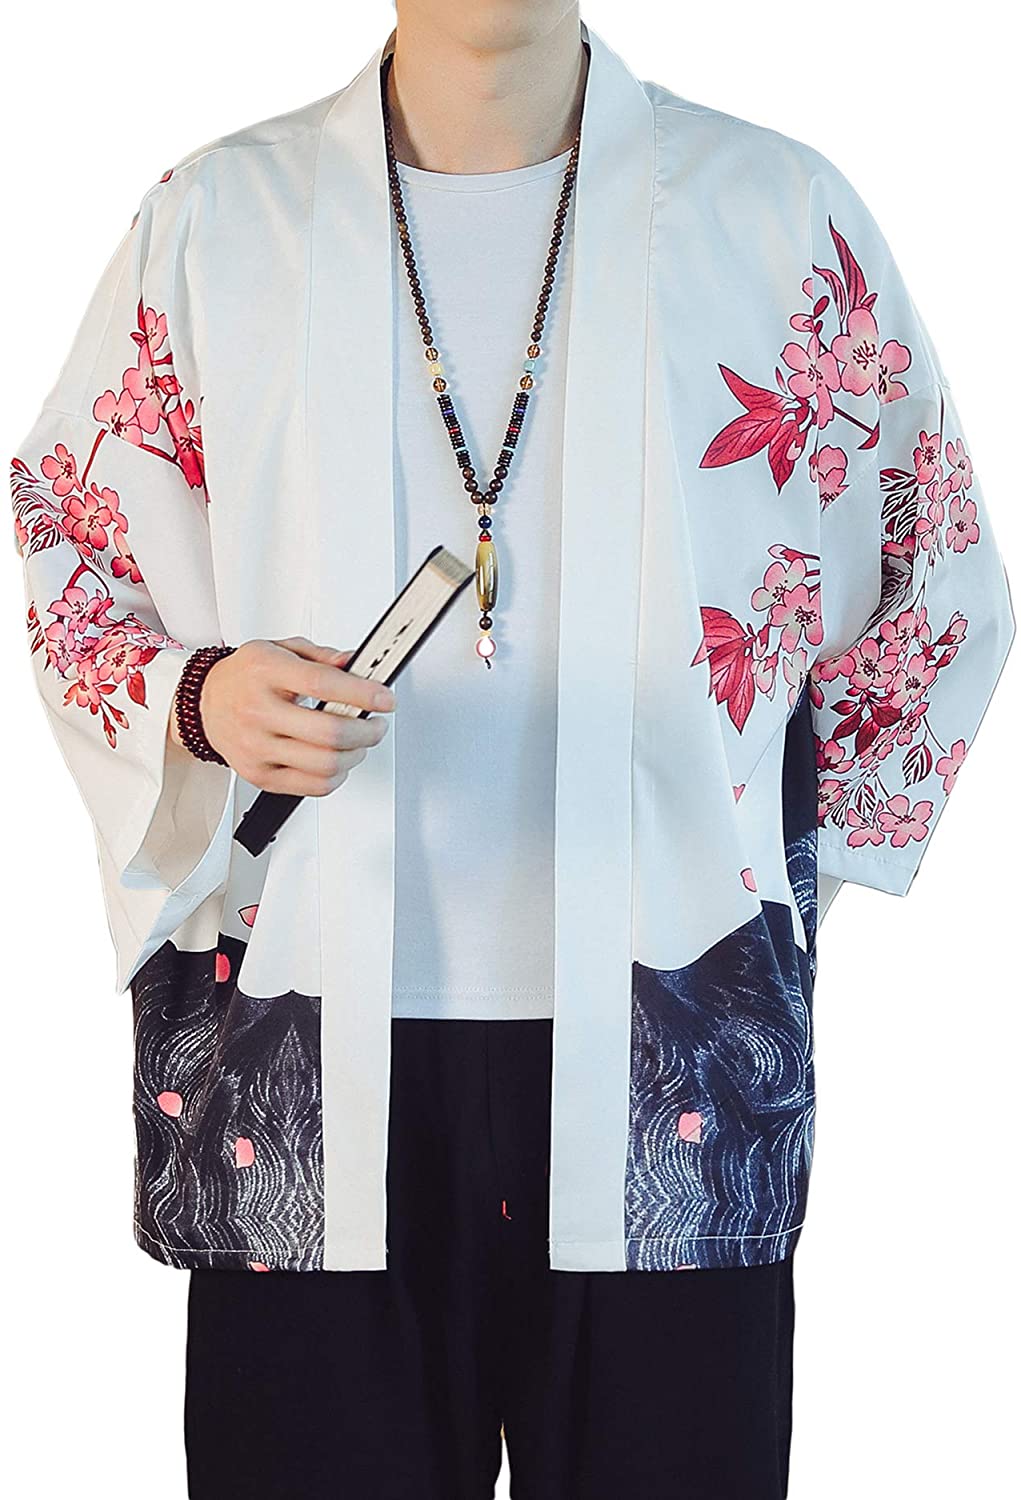 F_Gotal Mens Big& Tall Kimono Jackets Cardigan Lightweight Casual Dragon Printed Seven Sleeves Open Front Coat Outwear 